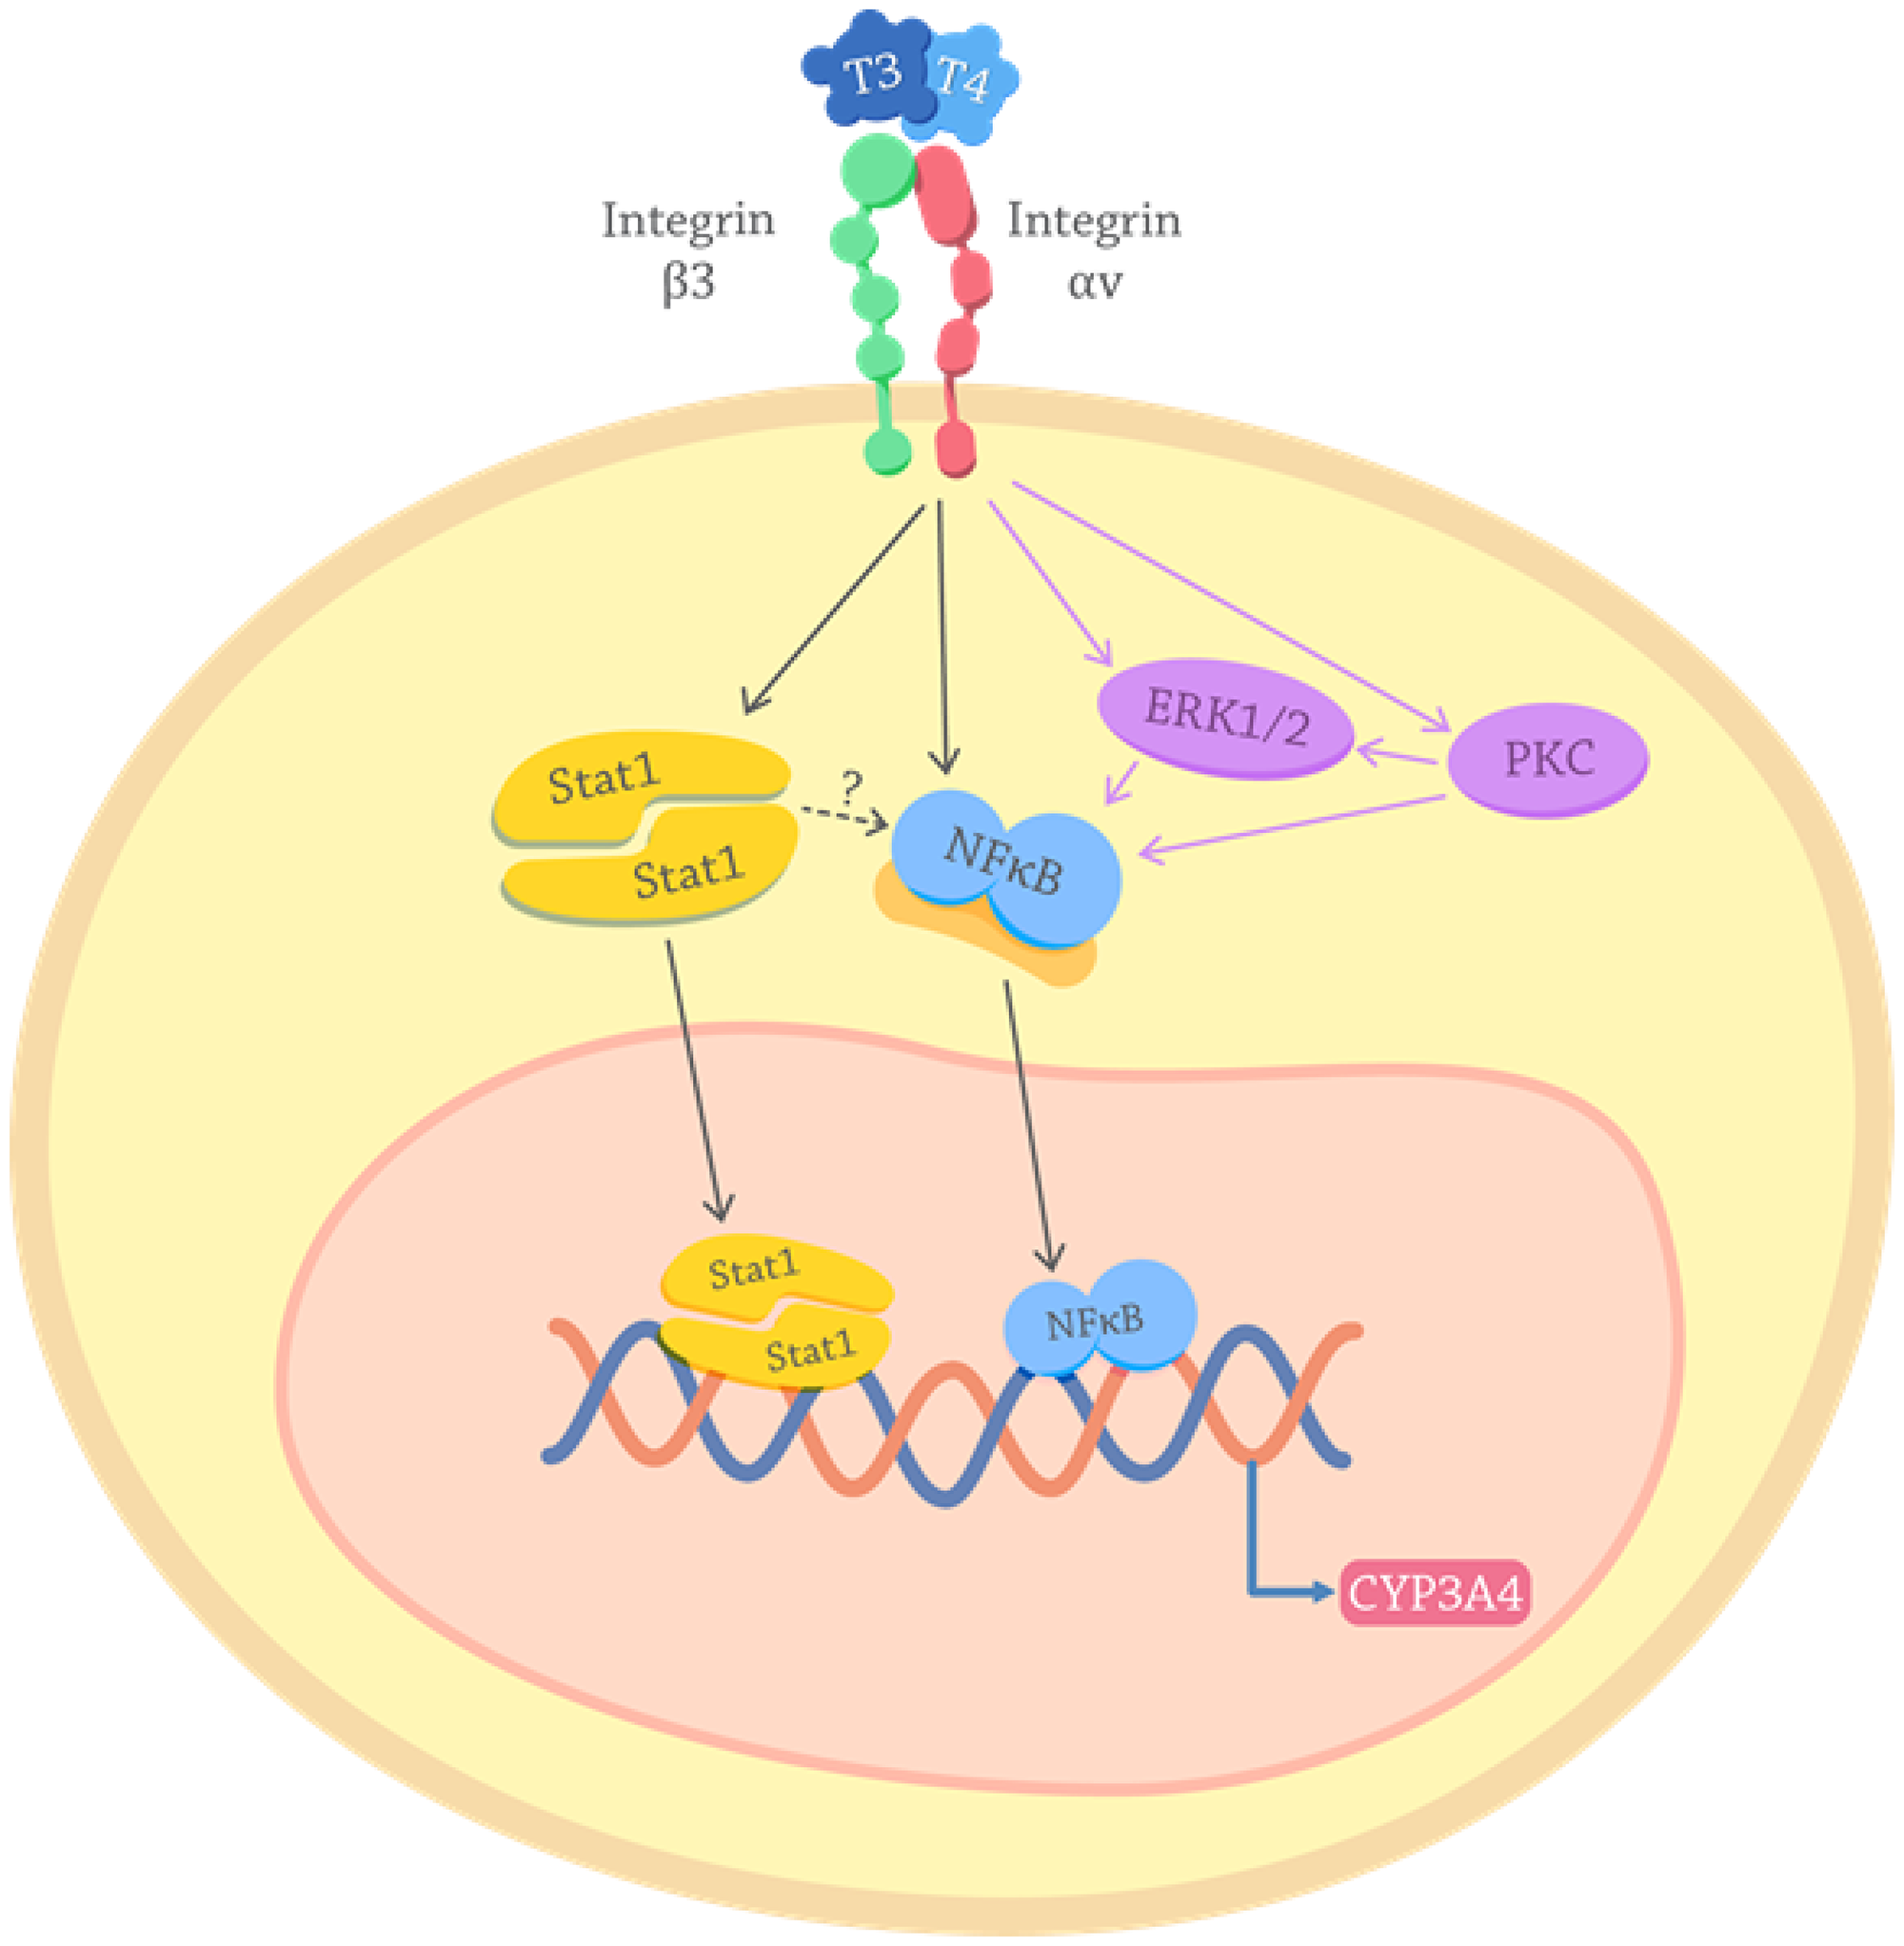 Proposed mechanisms for the effects of thyroid hormones on the CYP3A4 expression.